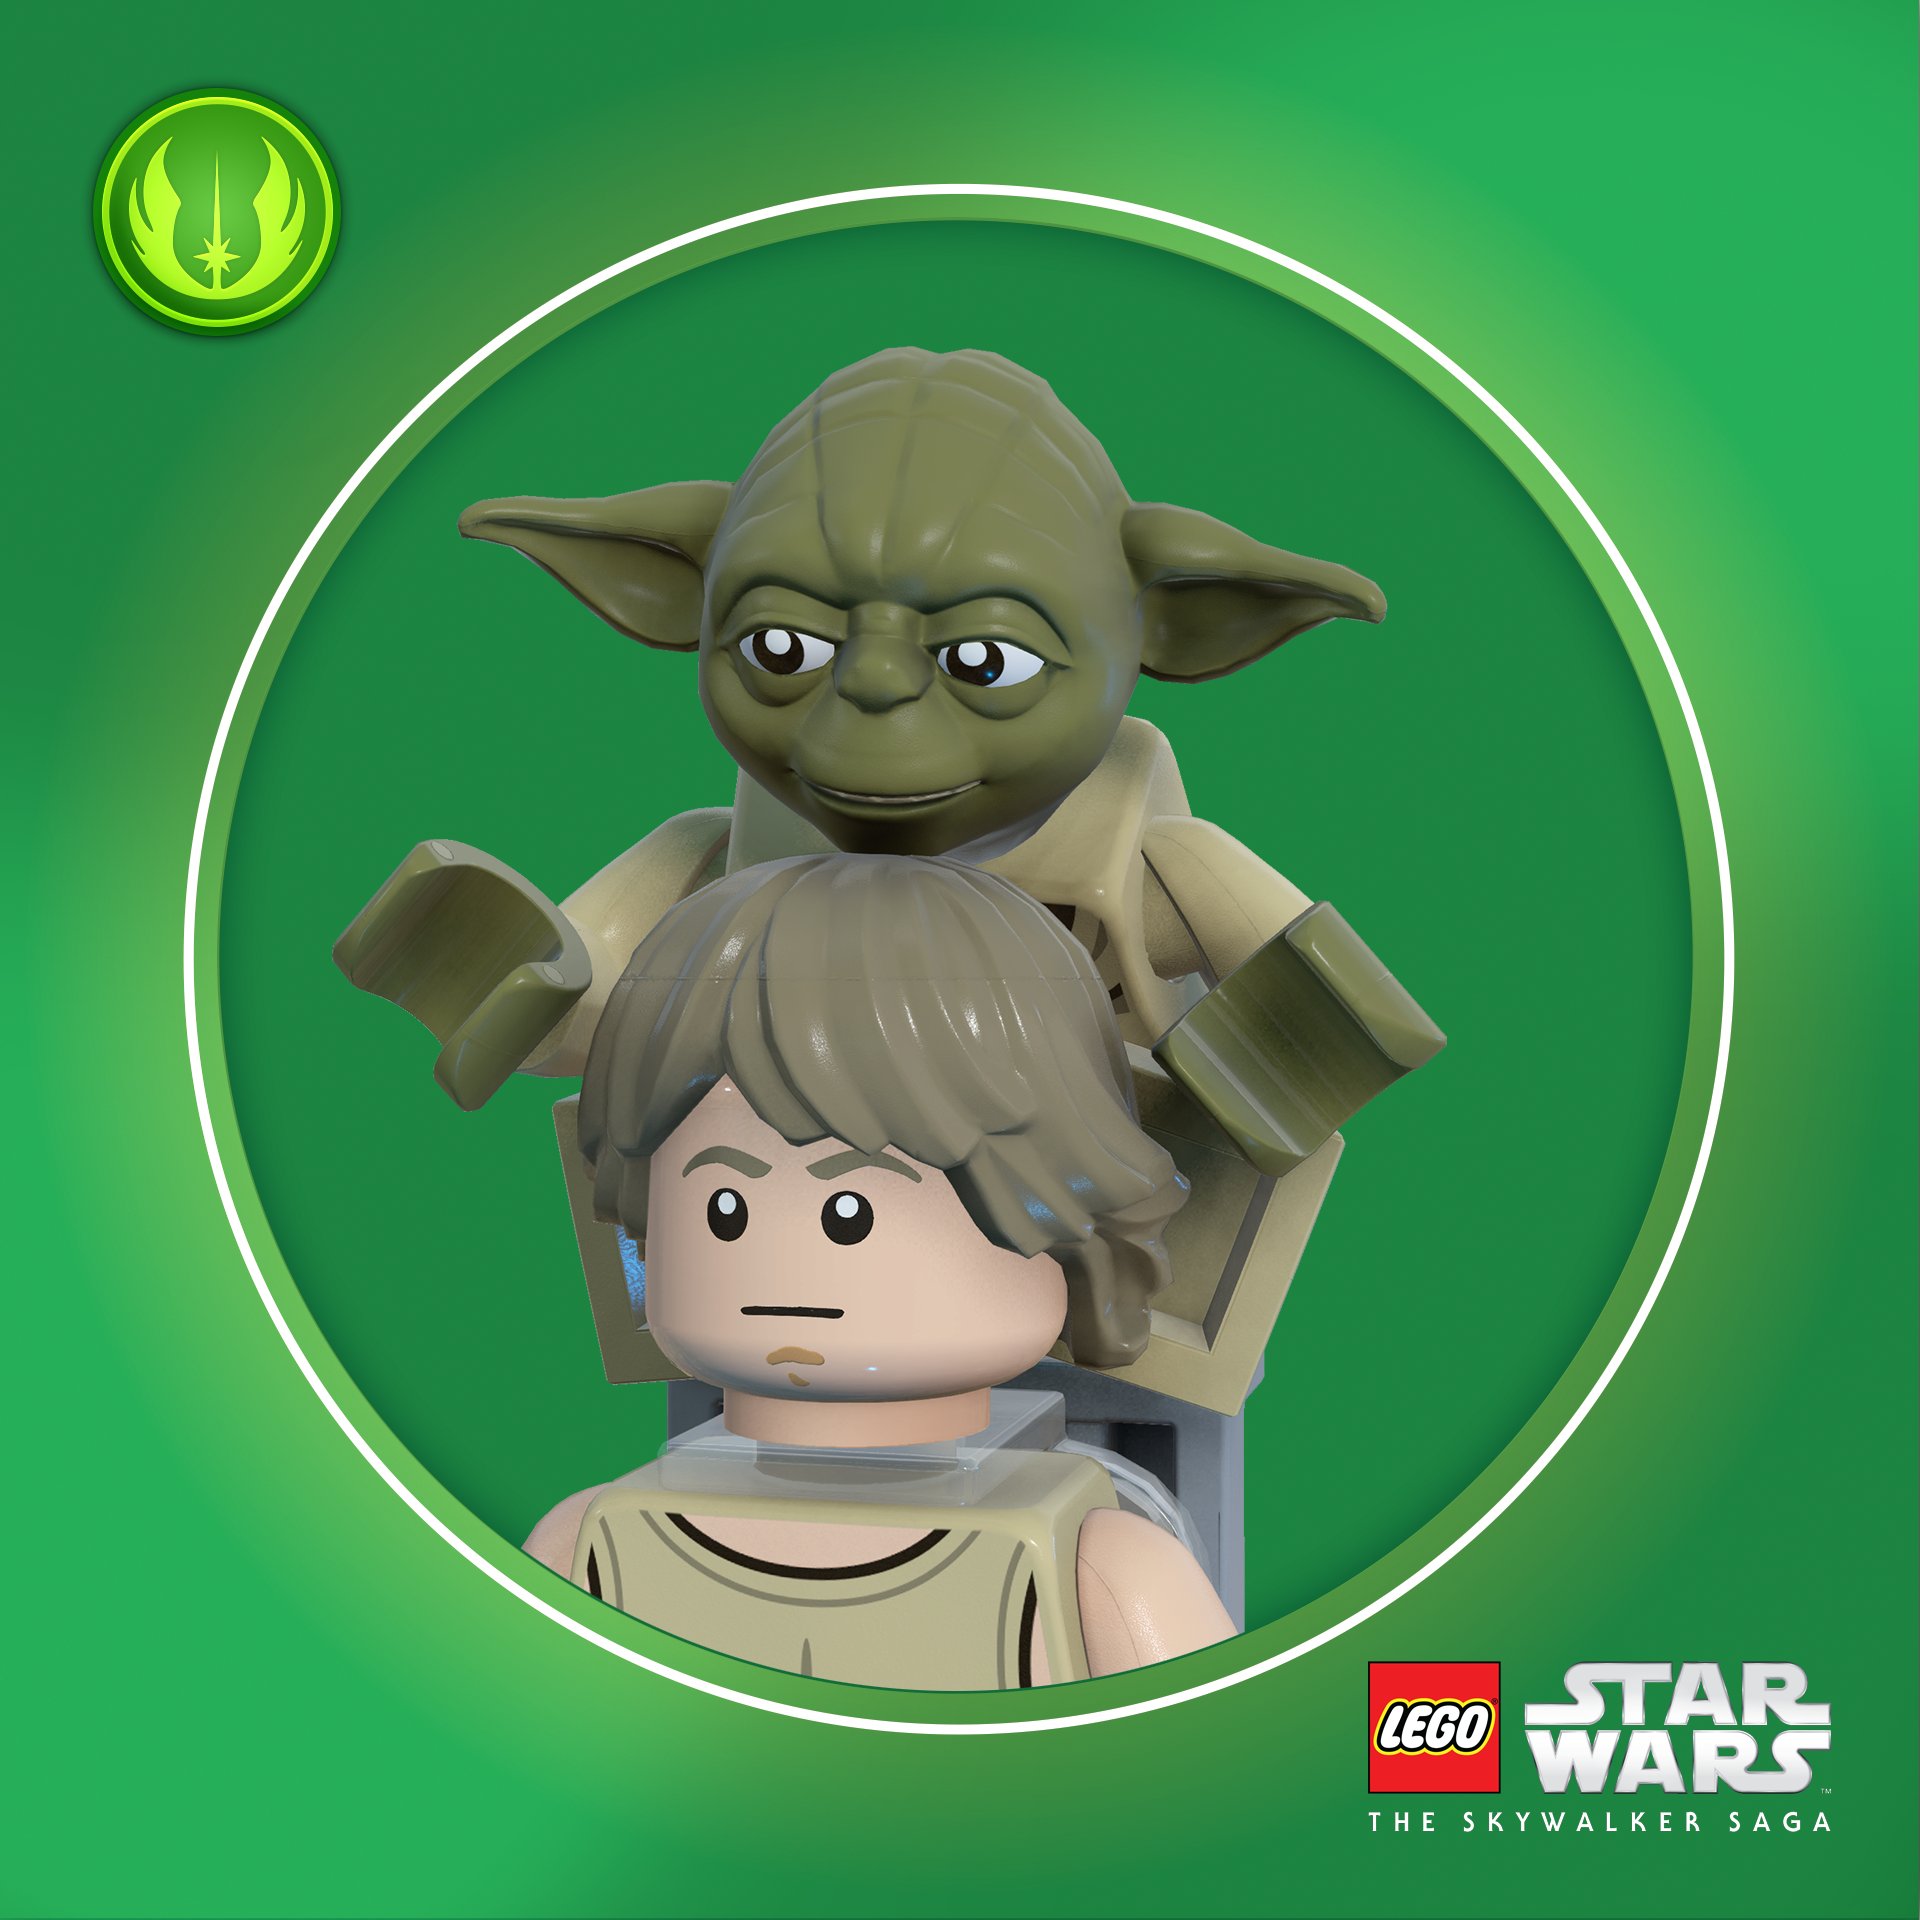 vil beslutte Anmelder animation LEGO Star Wars Game on Twitter: "We figured everyone needed a new profile  pic to celebrate next week's release! We'll post more tomorrow!  #LEGOStarWarsGame https://t.co/03FJRJ9Nyf" / Twitter